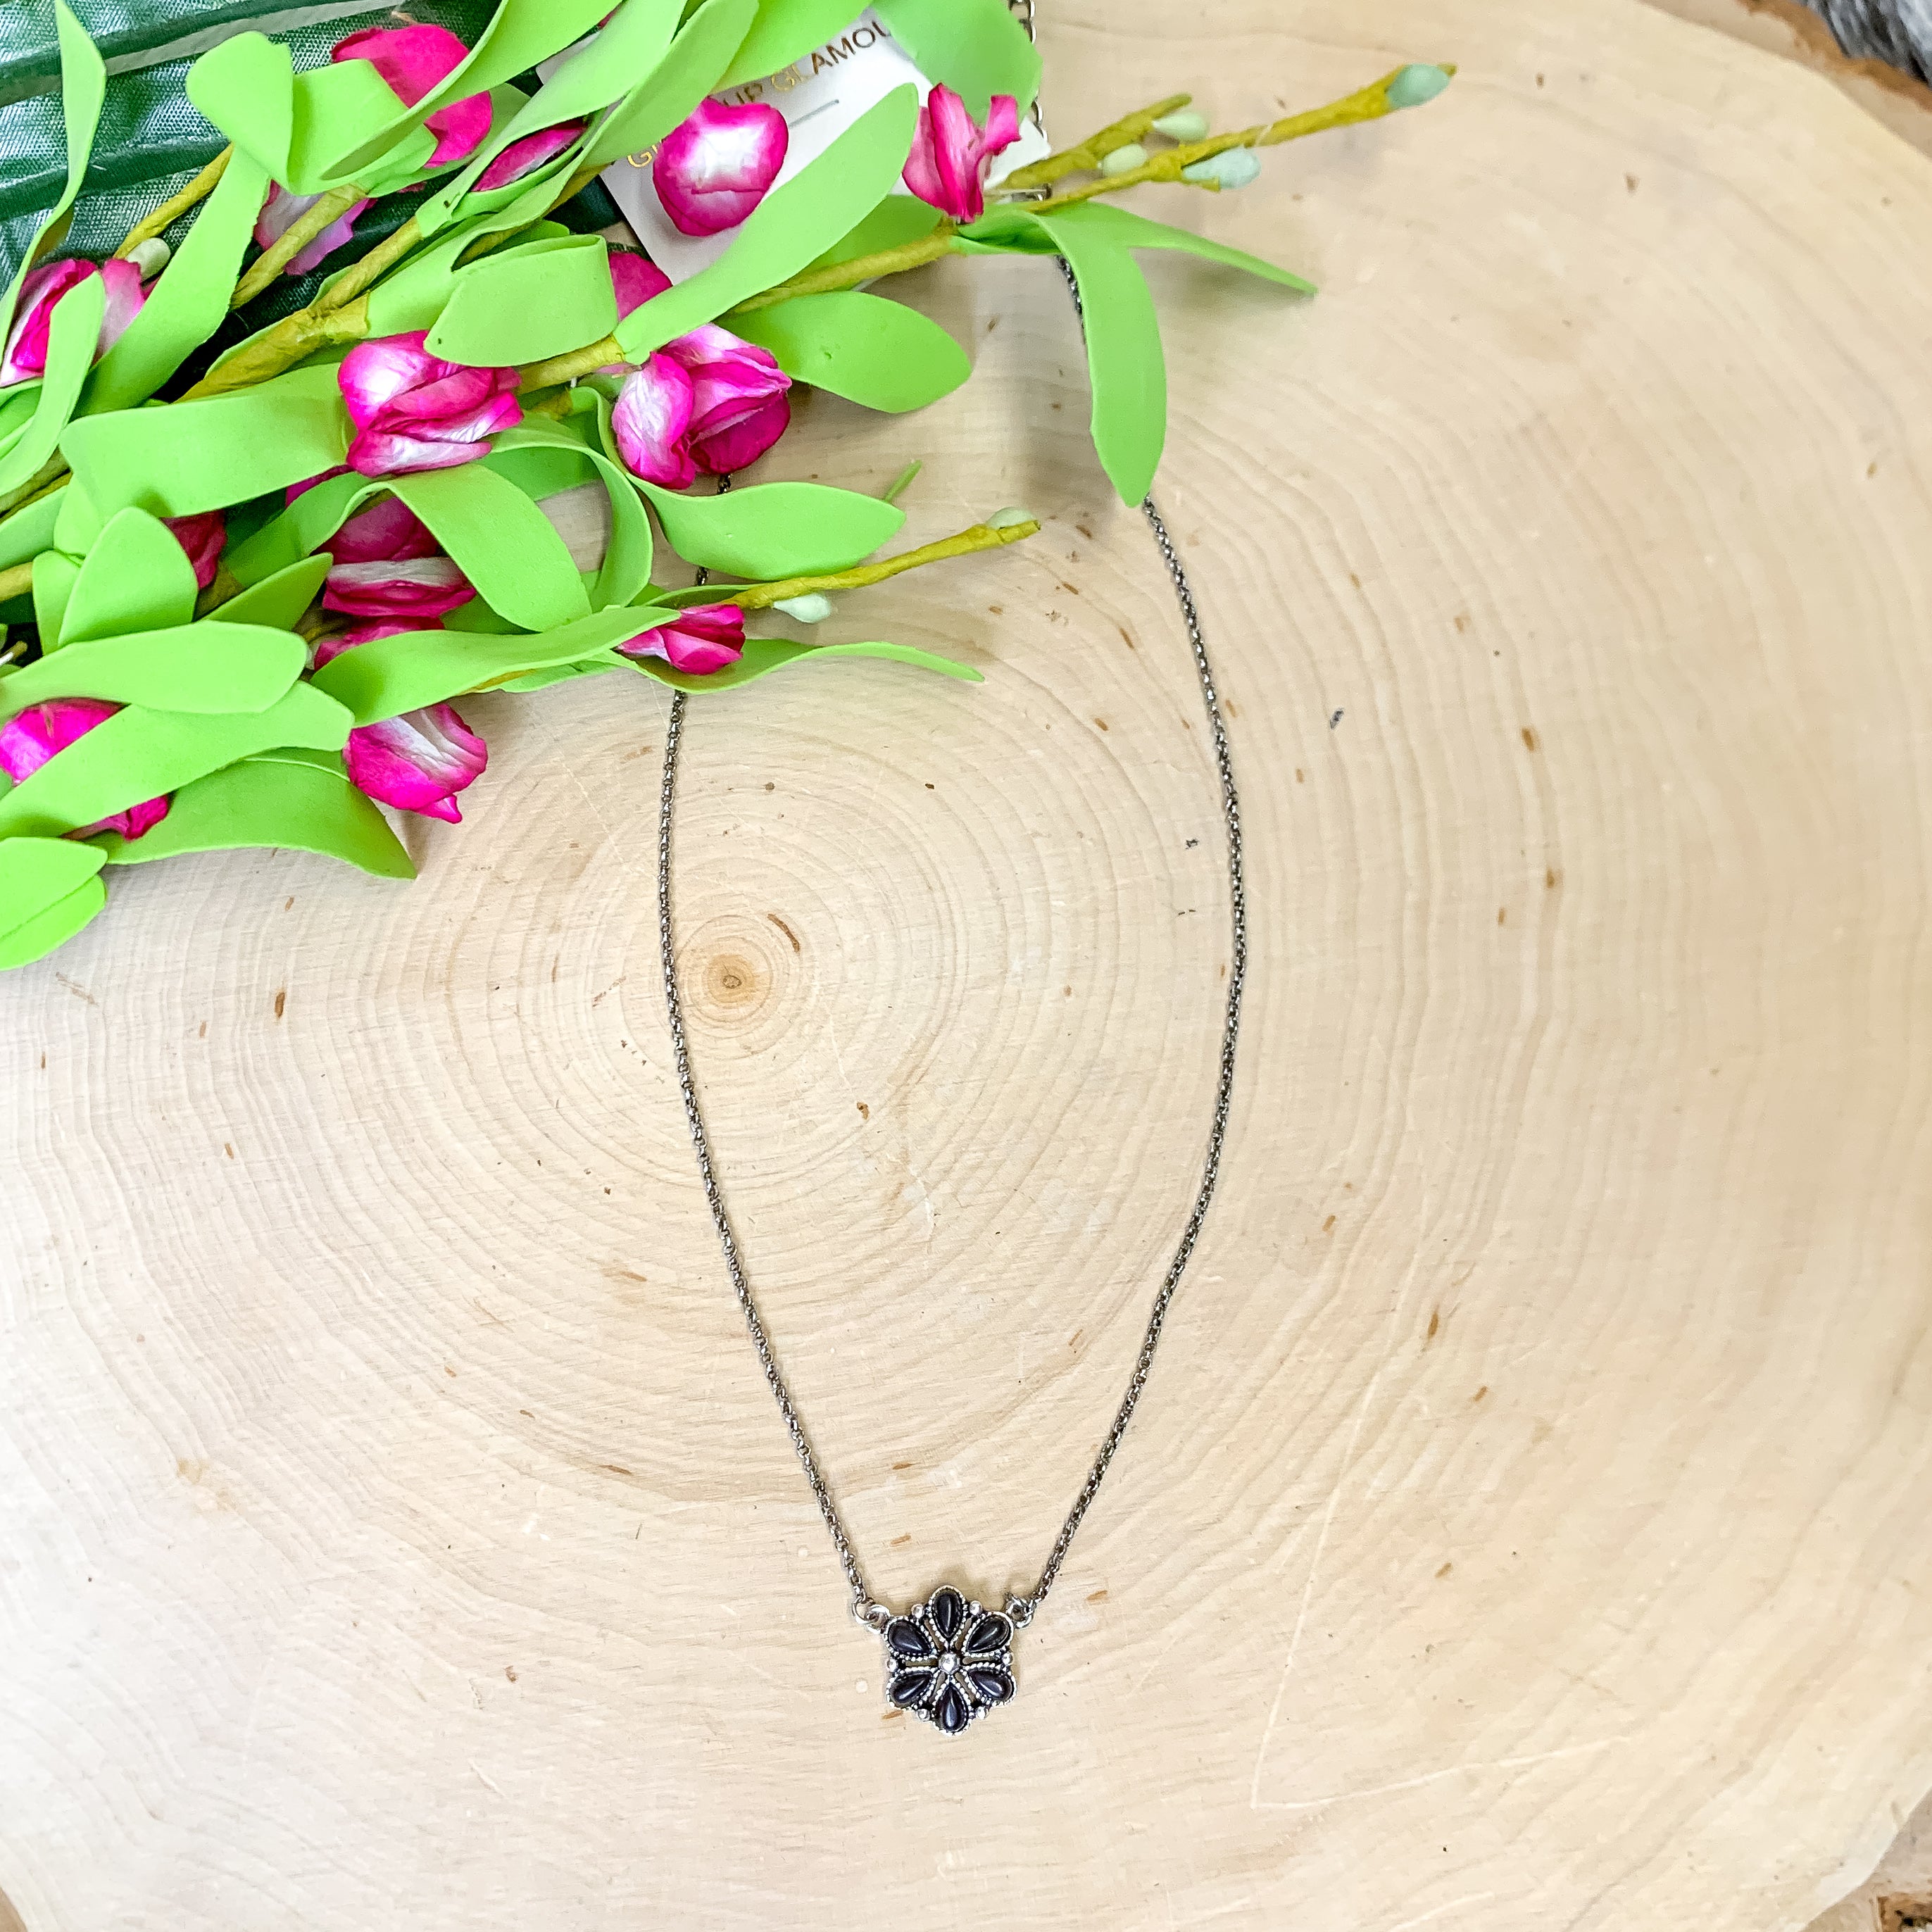 Silver Tone Chain Necklace with Flower Pendant in Black